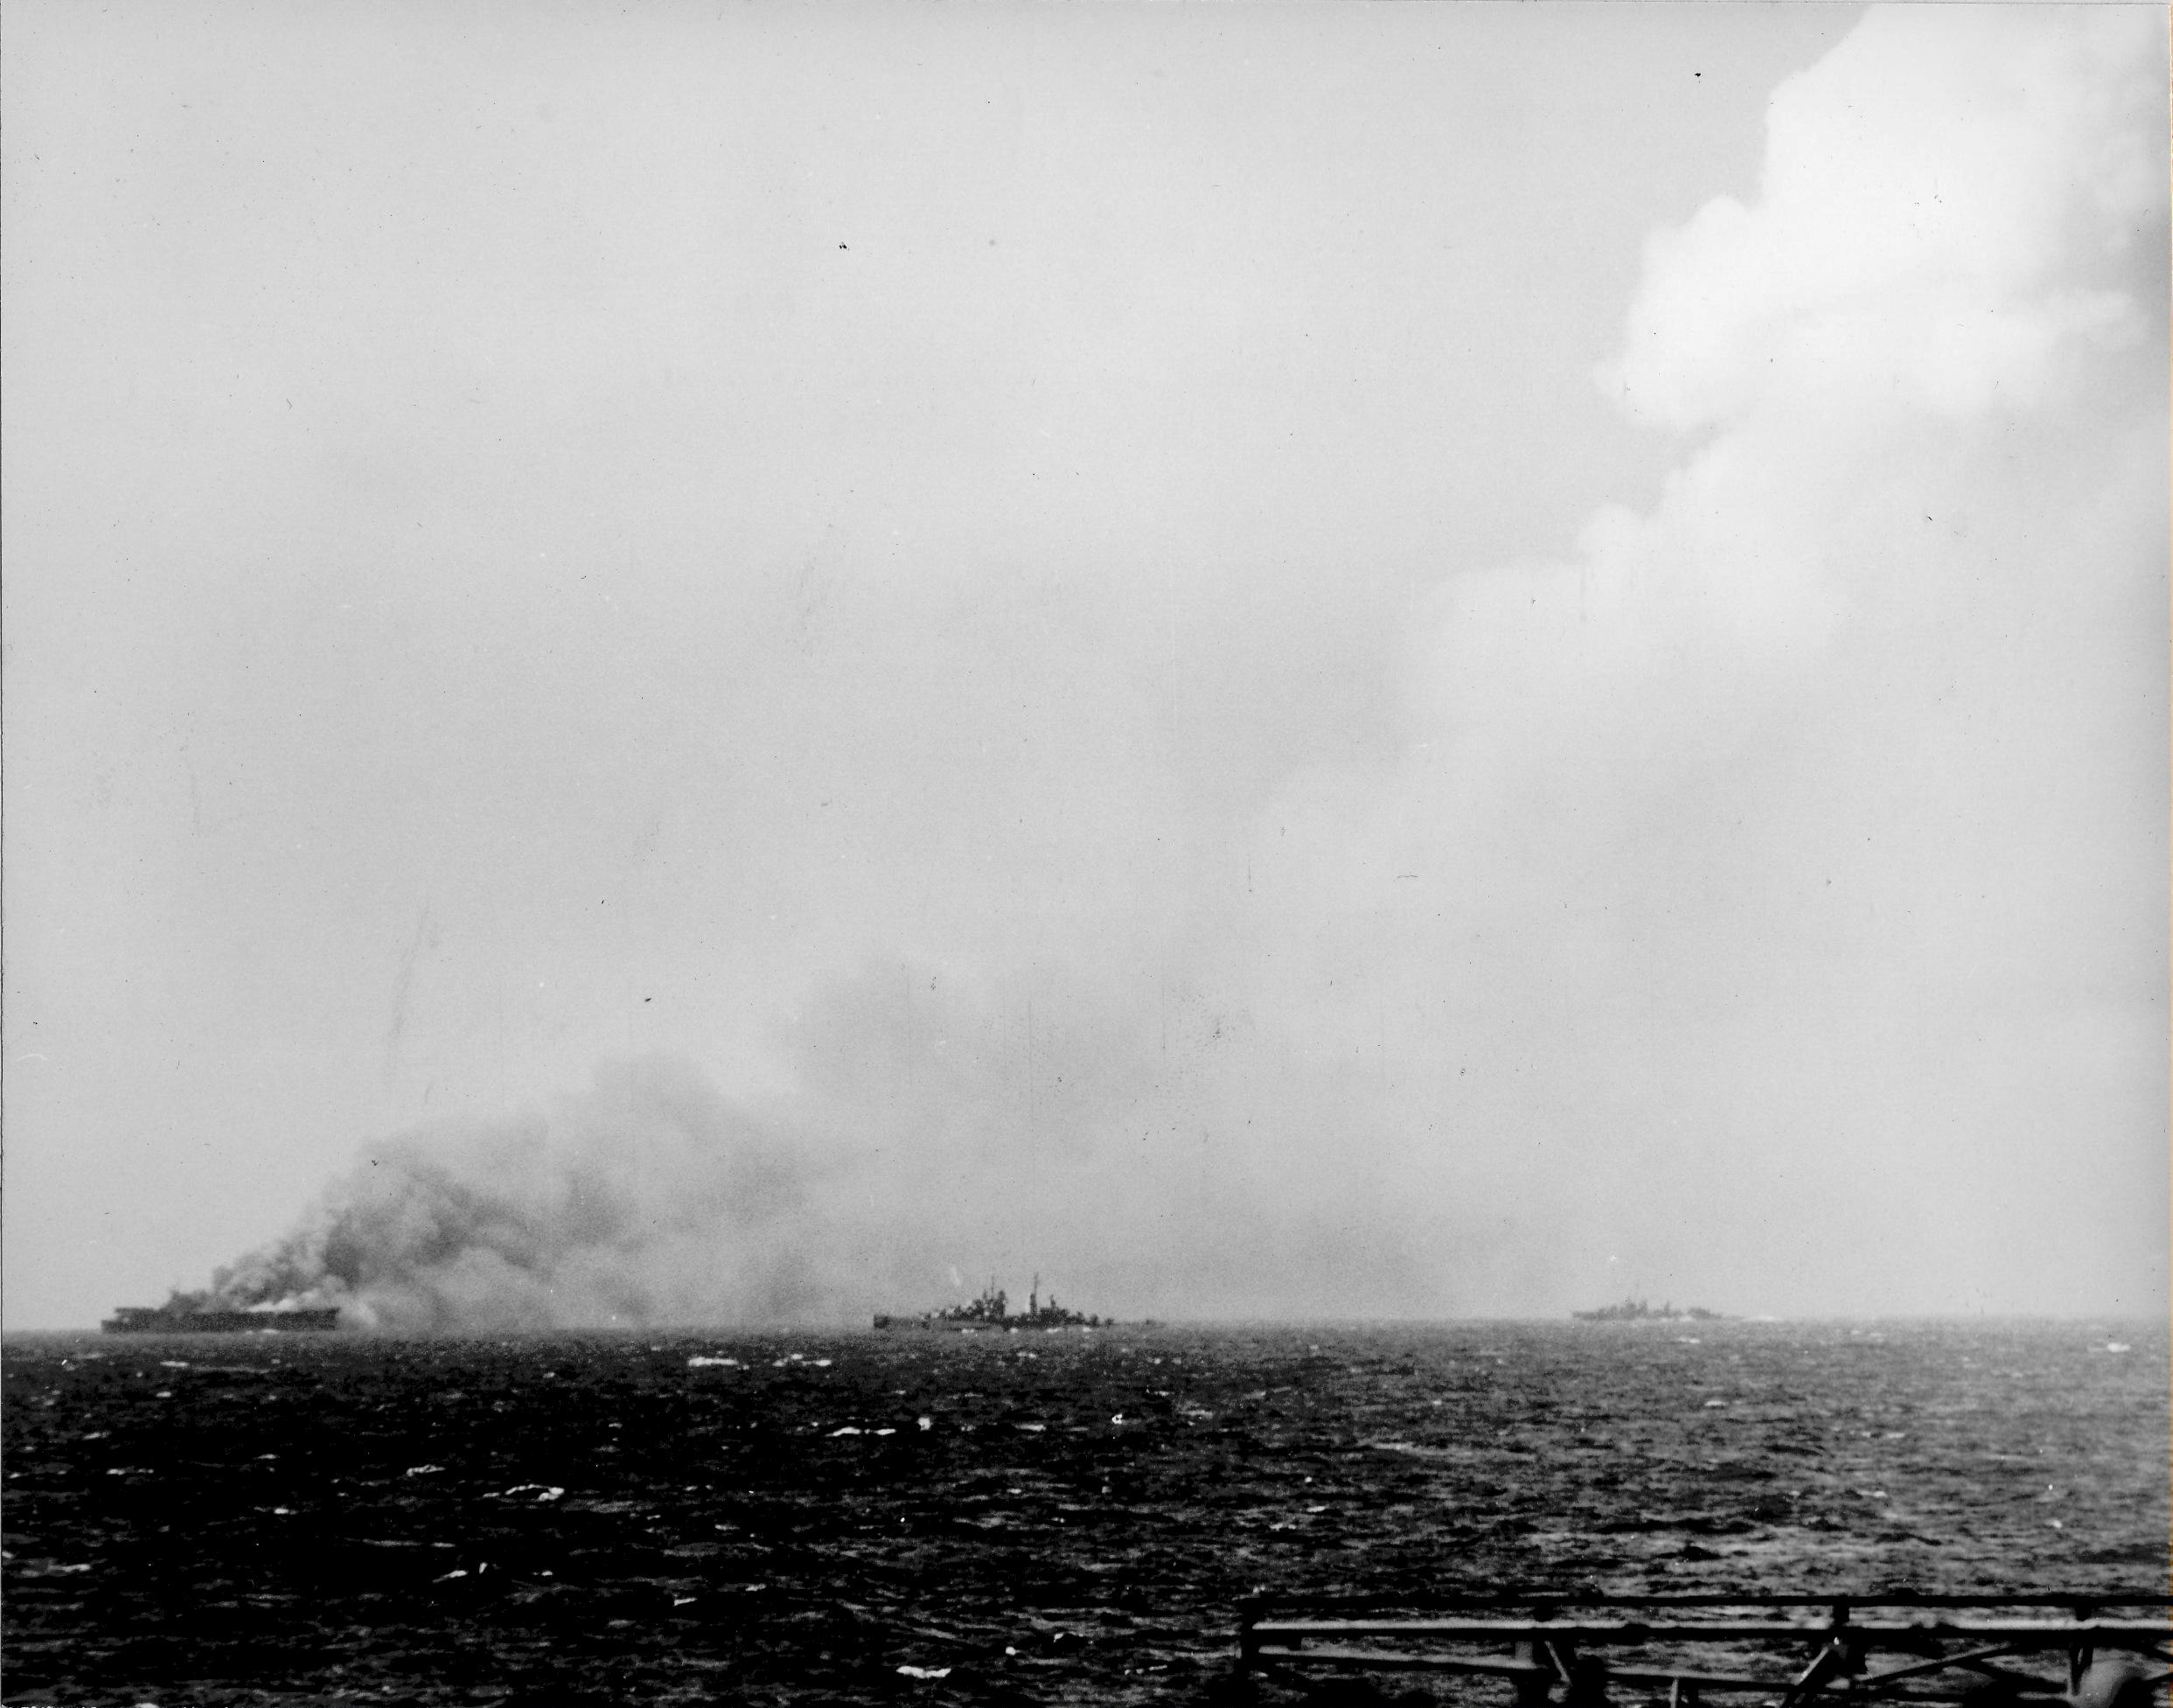 Badly damaged carrier USS Princeton burns as cruiser Reno and destroyer Morrison close in to offer assistance, 24 Oct 1944 as seen from USS Essex off Luzon in the Philippines.